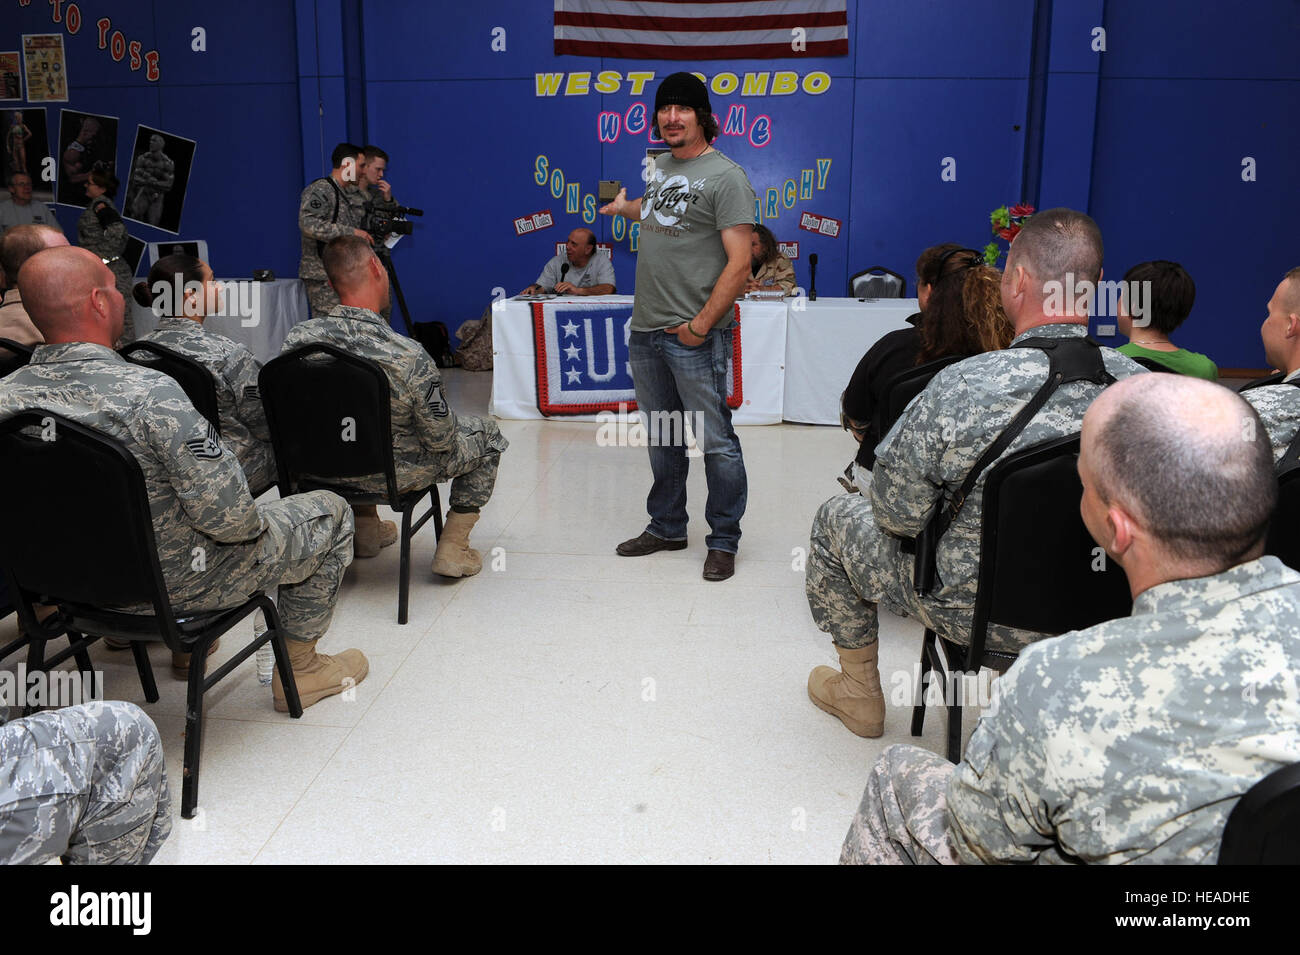 Kim Coates, a cast member of Sons of Anarchy, speaks to military personnel prior to a meet and greet event at Joint Base Balad, Iraq, March 15, 2010. Four cast members from the hit television show are touring bases throughout Southwest Asia to show their appreciation and provide a morale boost for deployed personnel.  Master Sgt. Linda C. Miller Stock Photo